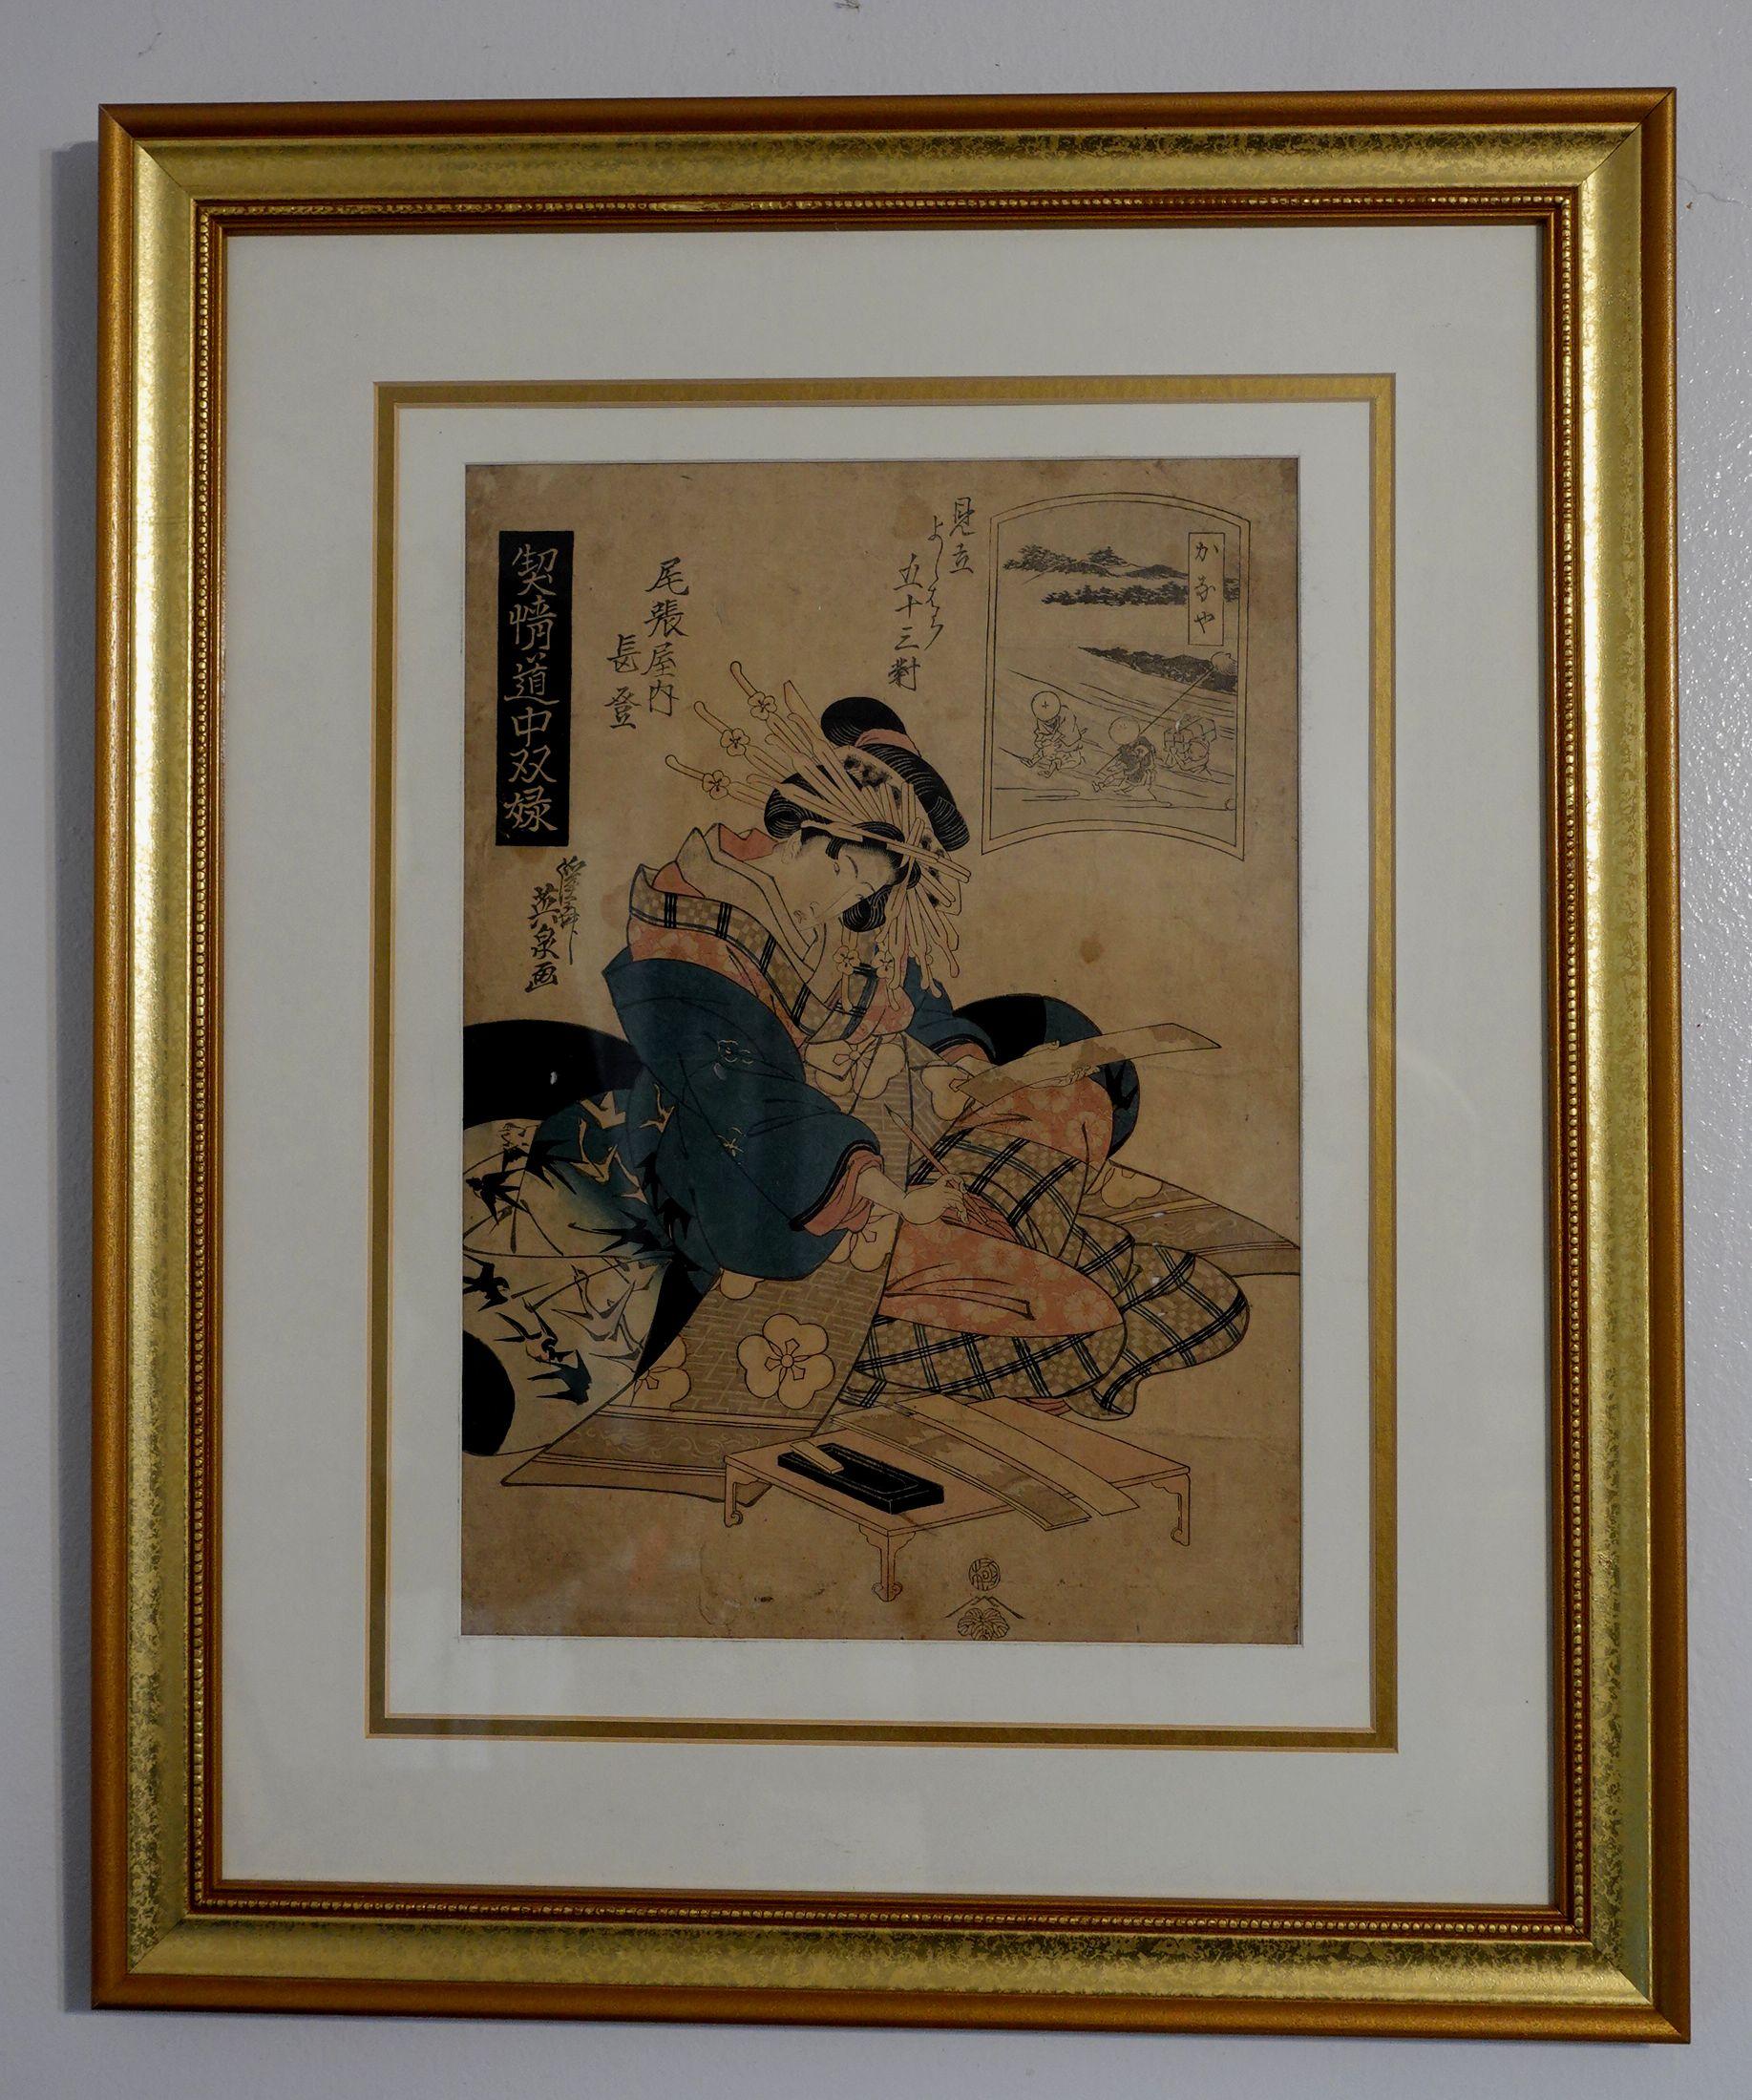 Antique Japanese Woodblock Print by Keisai Eisen 渓斎 英泉 (1790~1848), original and framed.

Dimension: with frame, 18.5